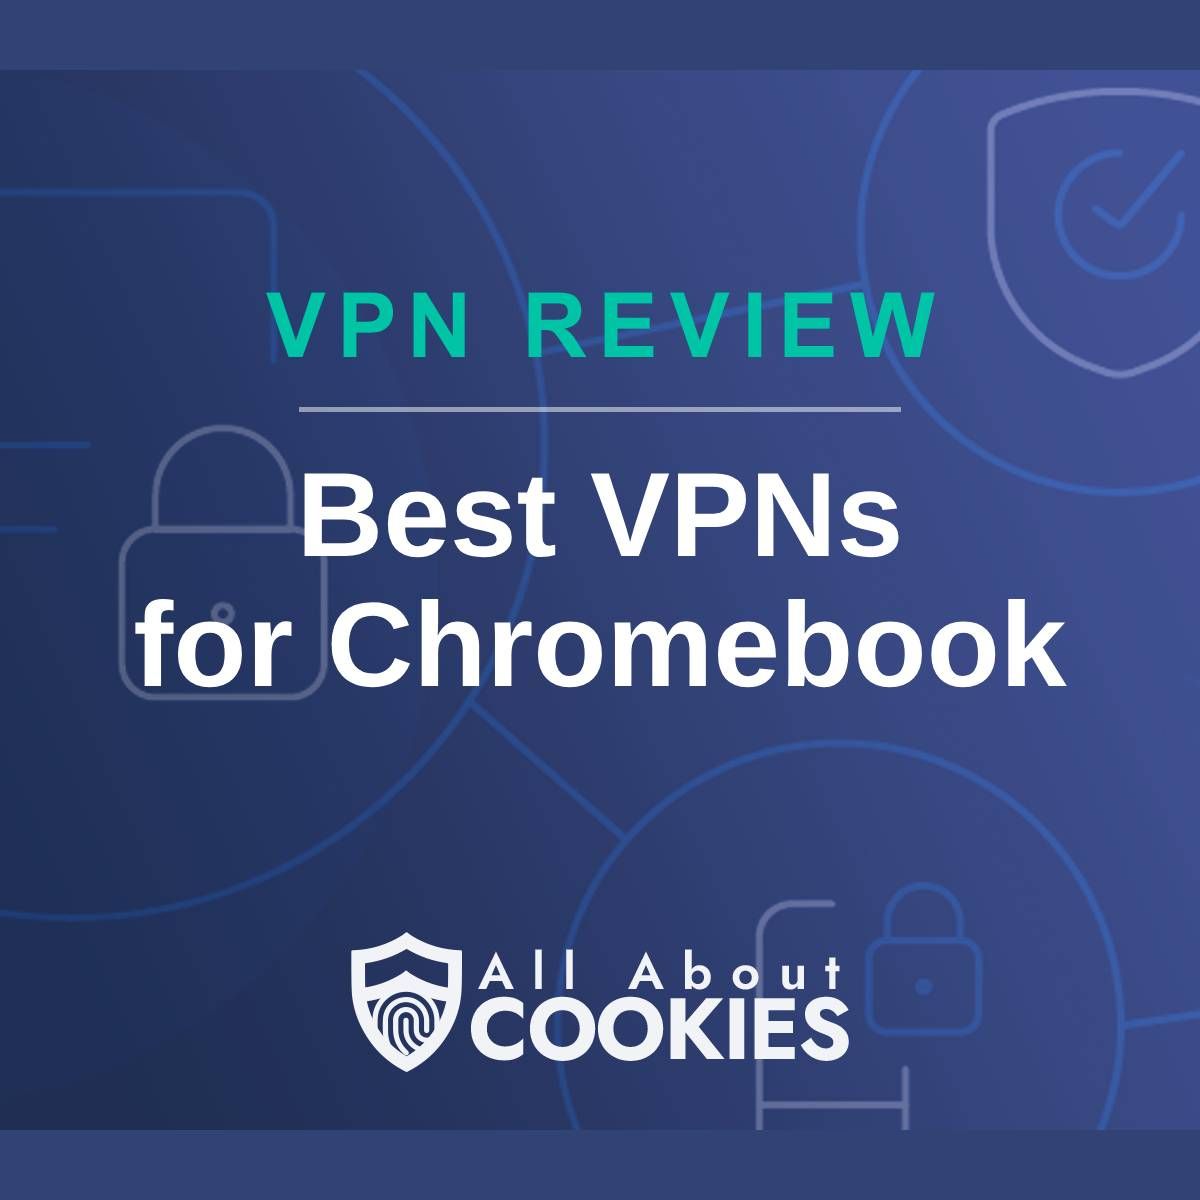 A blue background with images of locks and shields with the text &quot;VPN Review Best VPNs for Chromebook&quot; and the All About Cookies logo. 